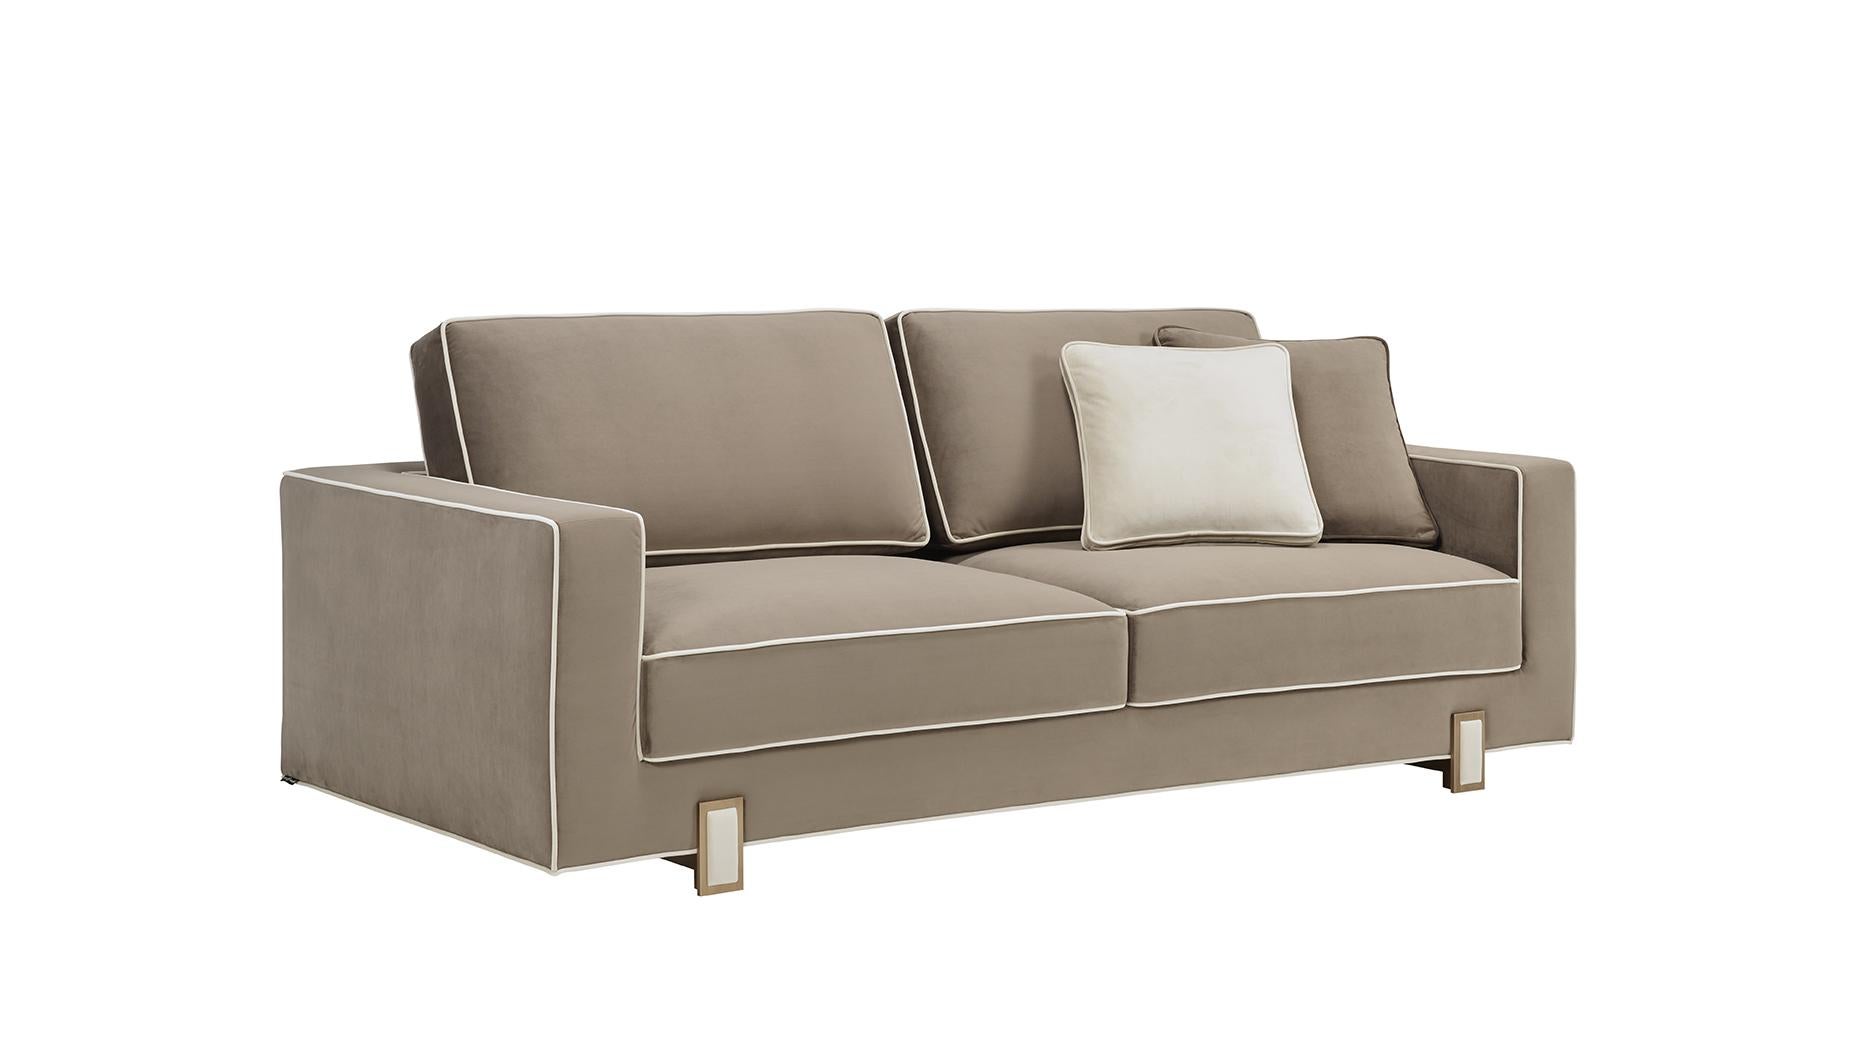 LUSO sofa is a very delicate piece, with special details, designed to be used on a daily basis. Upholstered with two fabrics, using a contrasting piping for an refined result. The feet, in antique brass color, have a fabric detail at the center,